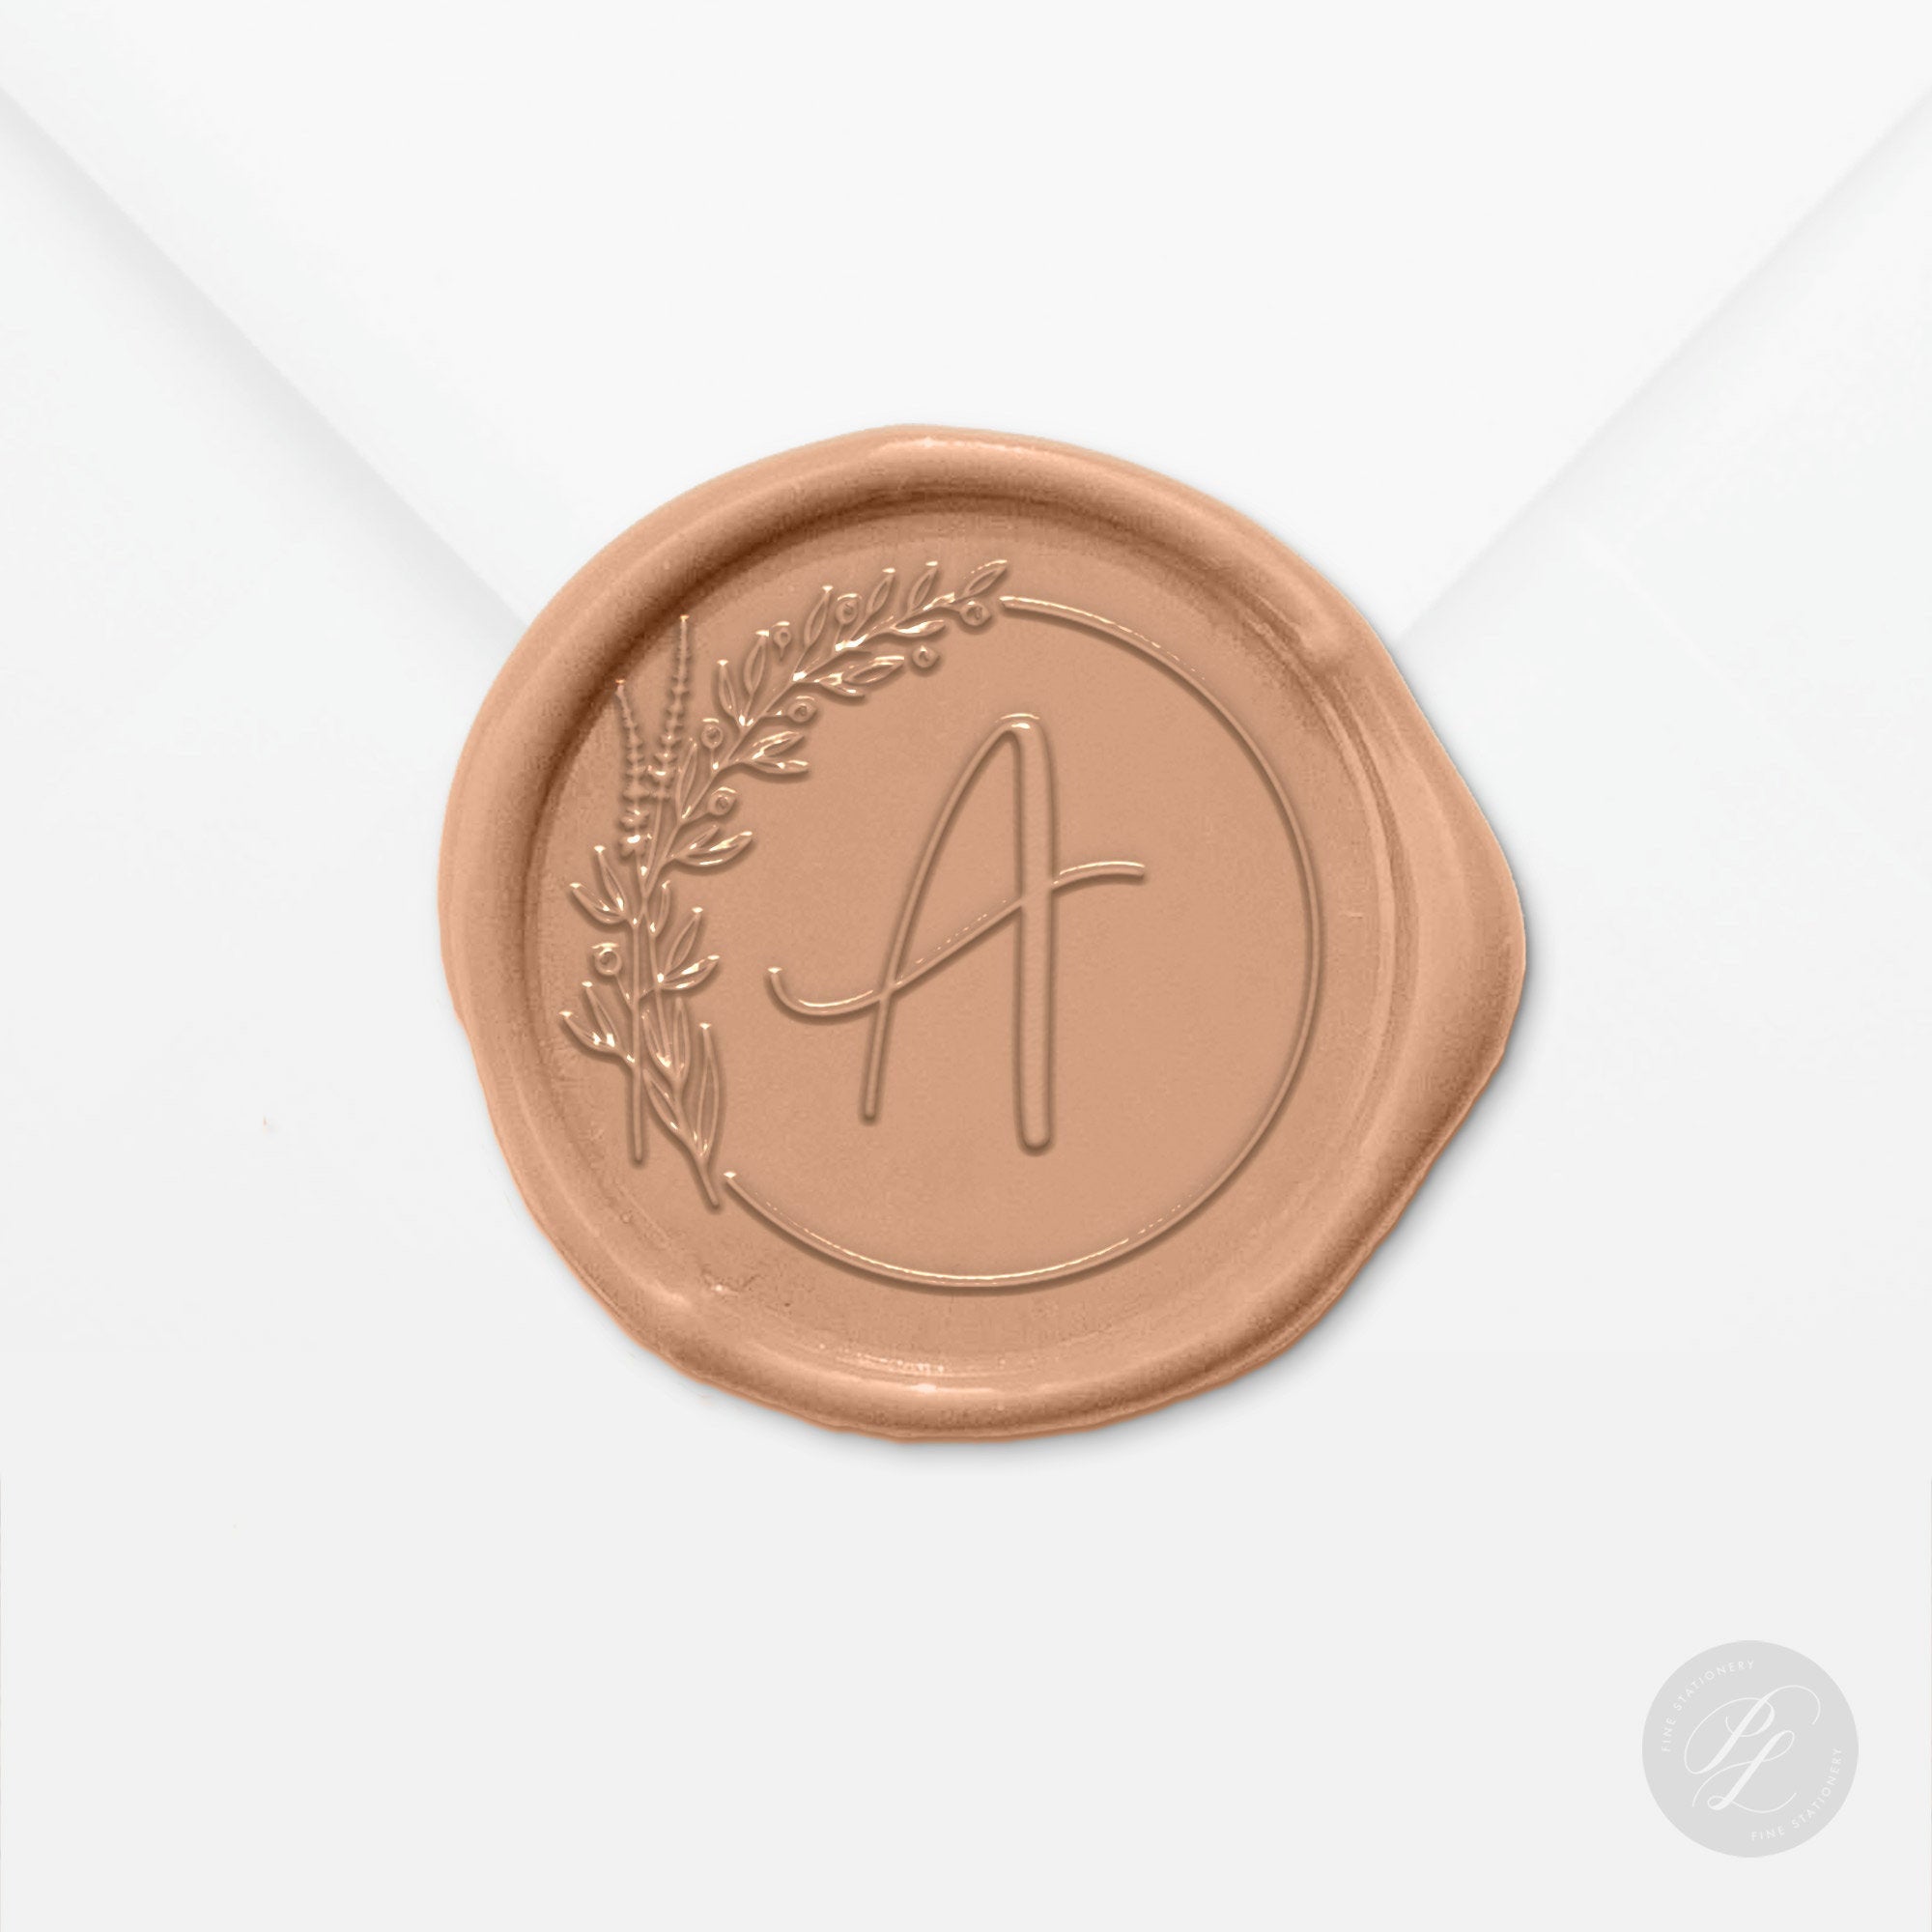 Envelope Seals, Wedding Invitation Stickers, Initial Stickers for